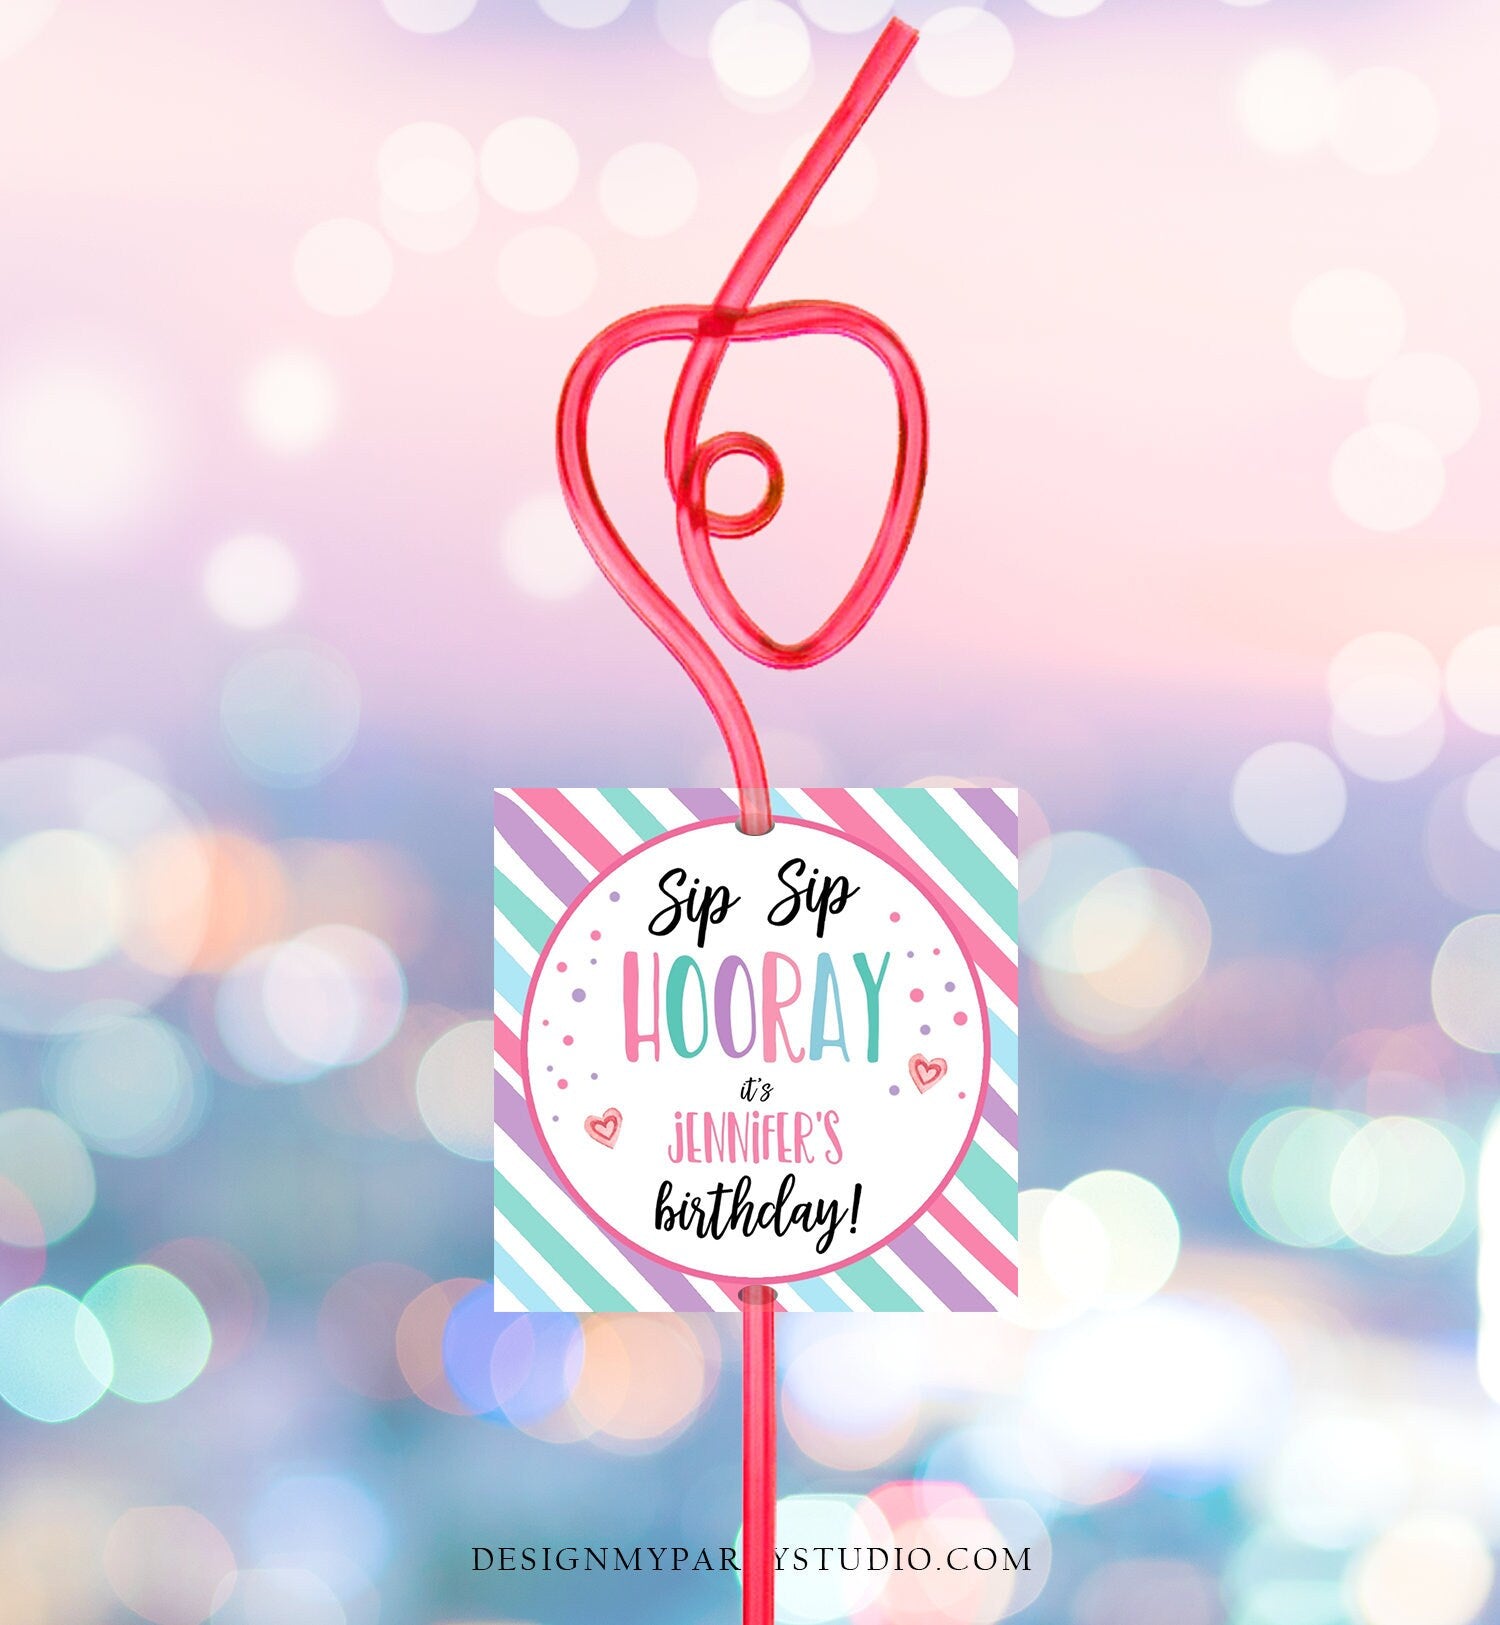 Editable Crazy Straw Tags Birthday Tags Sip Sip Hooray Its Your Birthday Favors Personalized Straw Tag Pink Purple Digital PRINTABLE